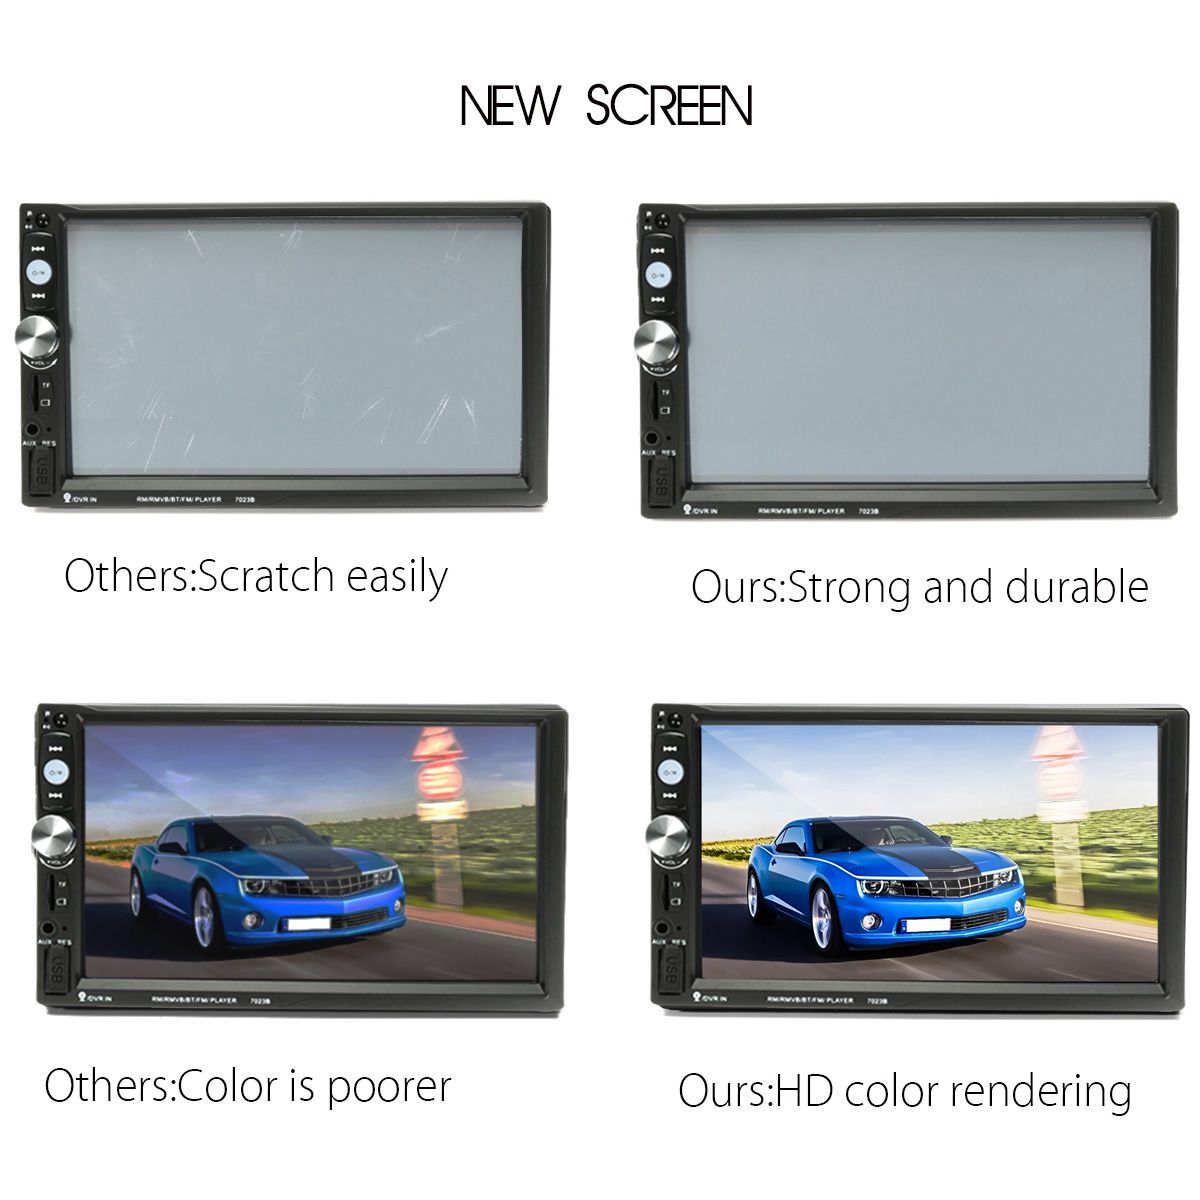 iMars-7023B-7-Inch-2-DIN-Car-MP5-Player-Stereo-Radio-FM-USB-AUX-HD-bluetooth-Touch-Screen-Support-Re-1535812